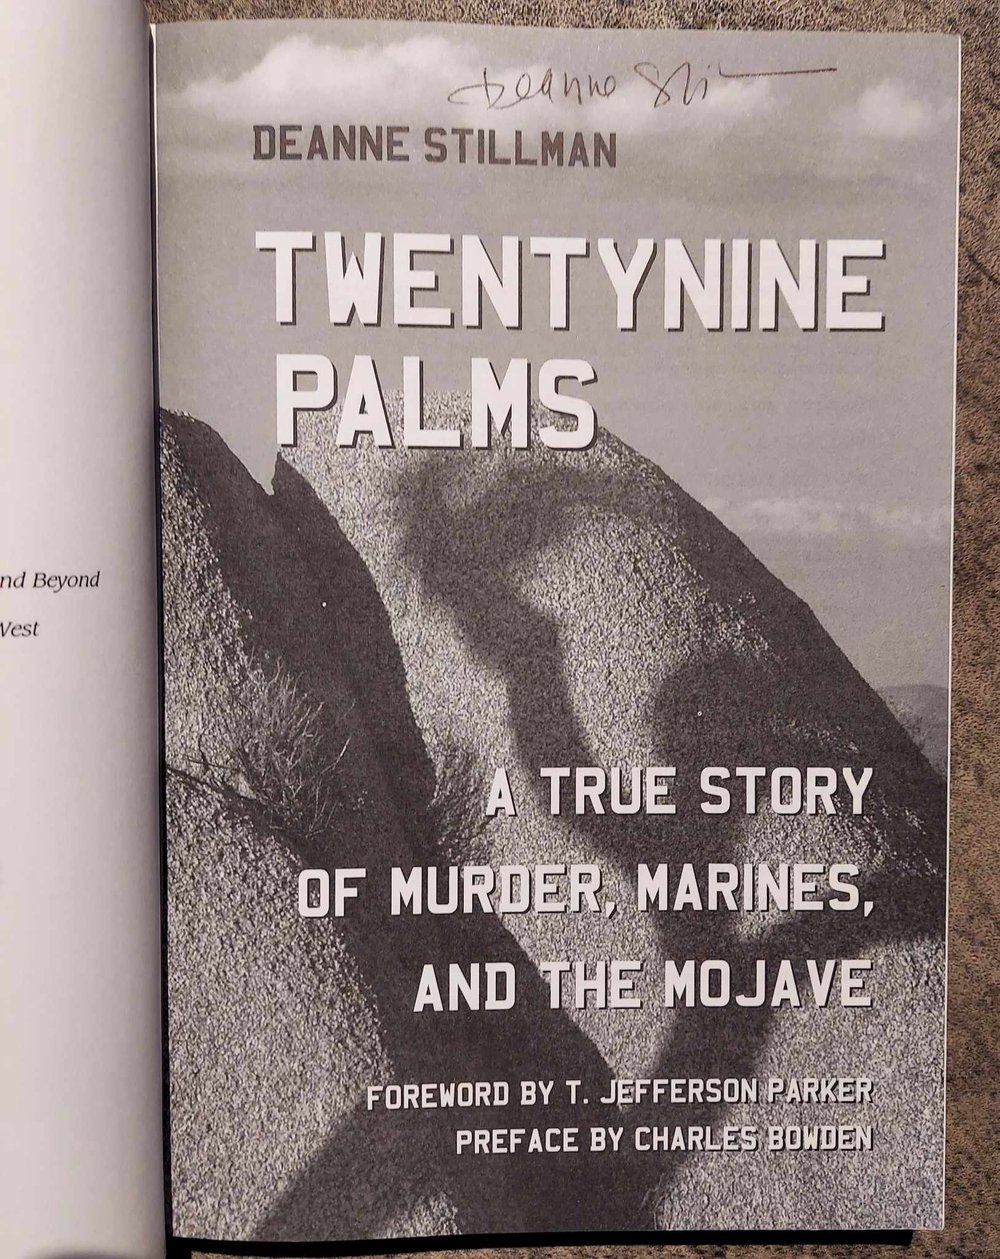 Twentynine Palms: A True Story of Murder, Marines, and the Mojave, by Deanne Stillman - SIGNED